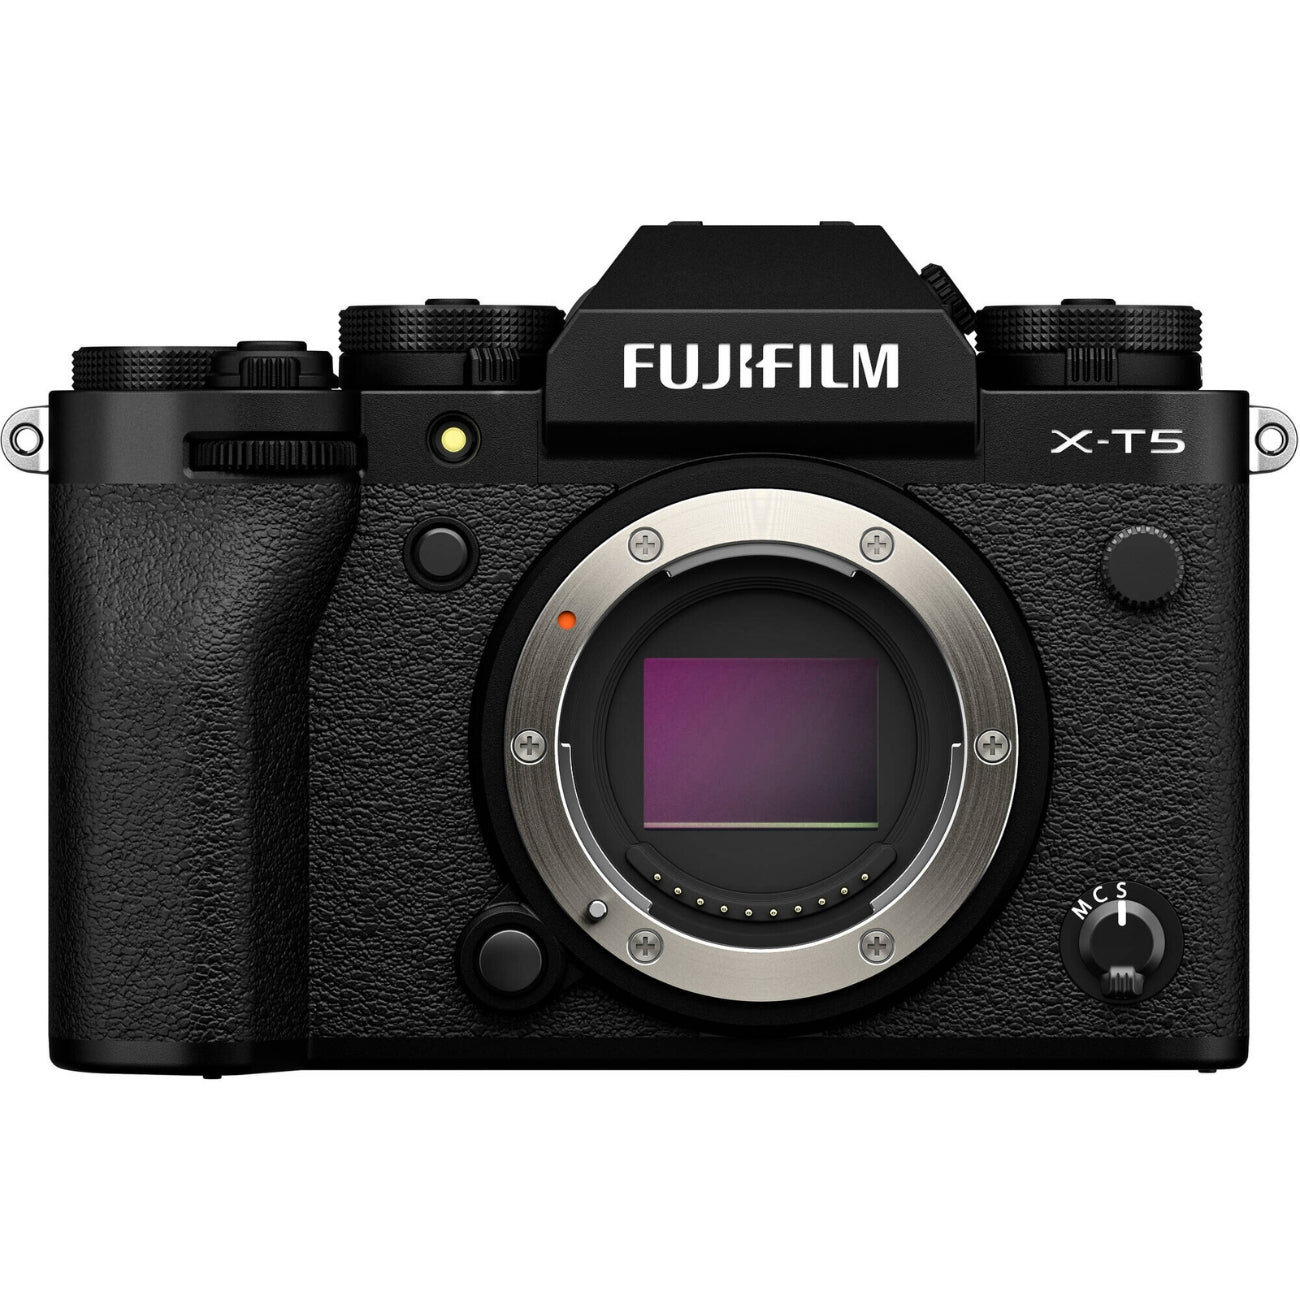 Front view of the Fujifilm X-T5